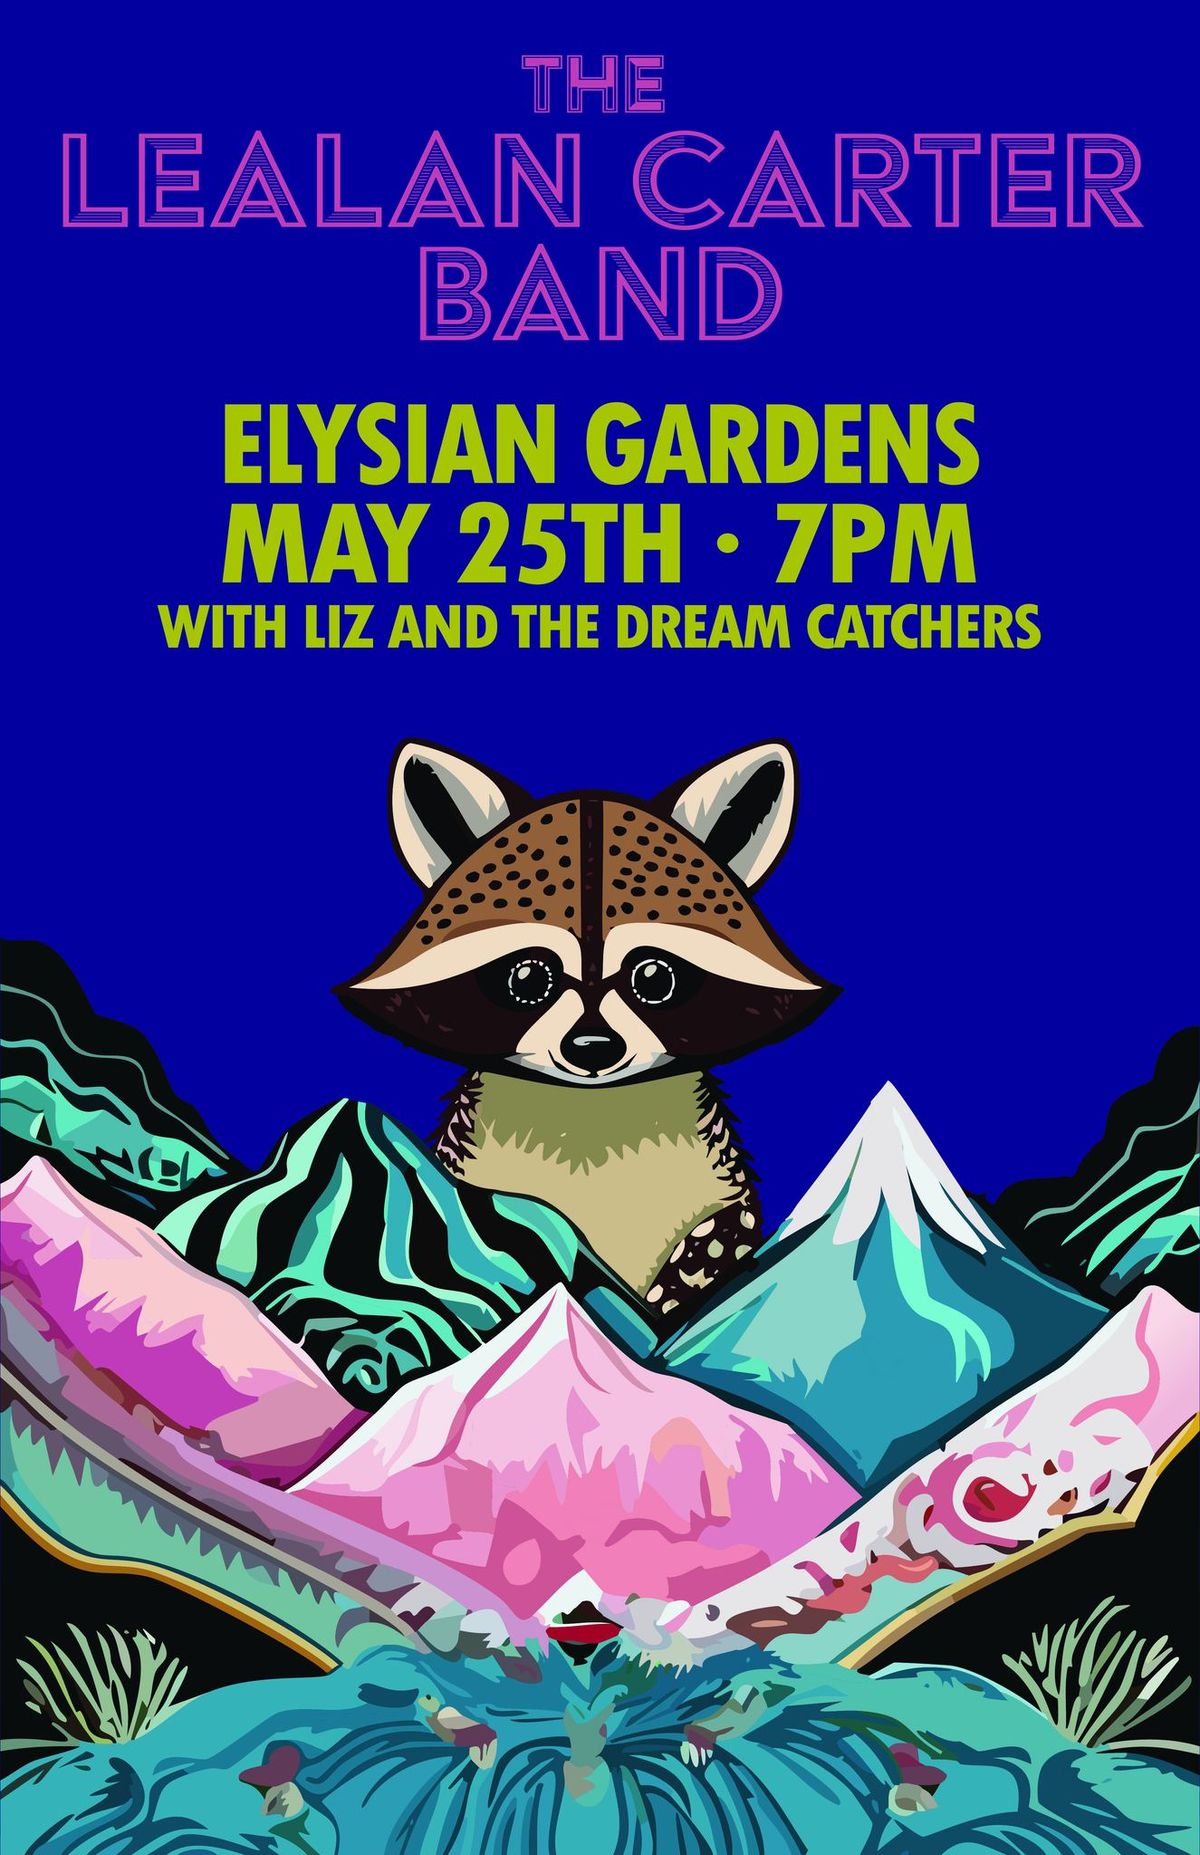 The LeAlan Carter Band & Liz and the Dream Catchers at Elysian Gardens